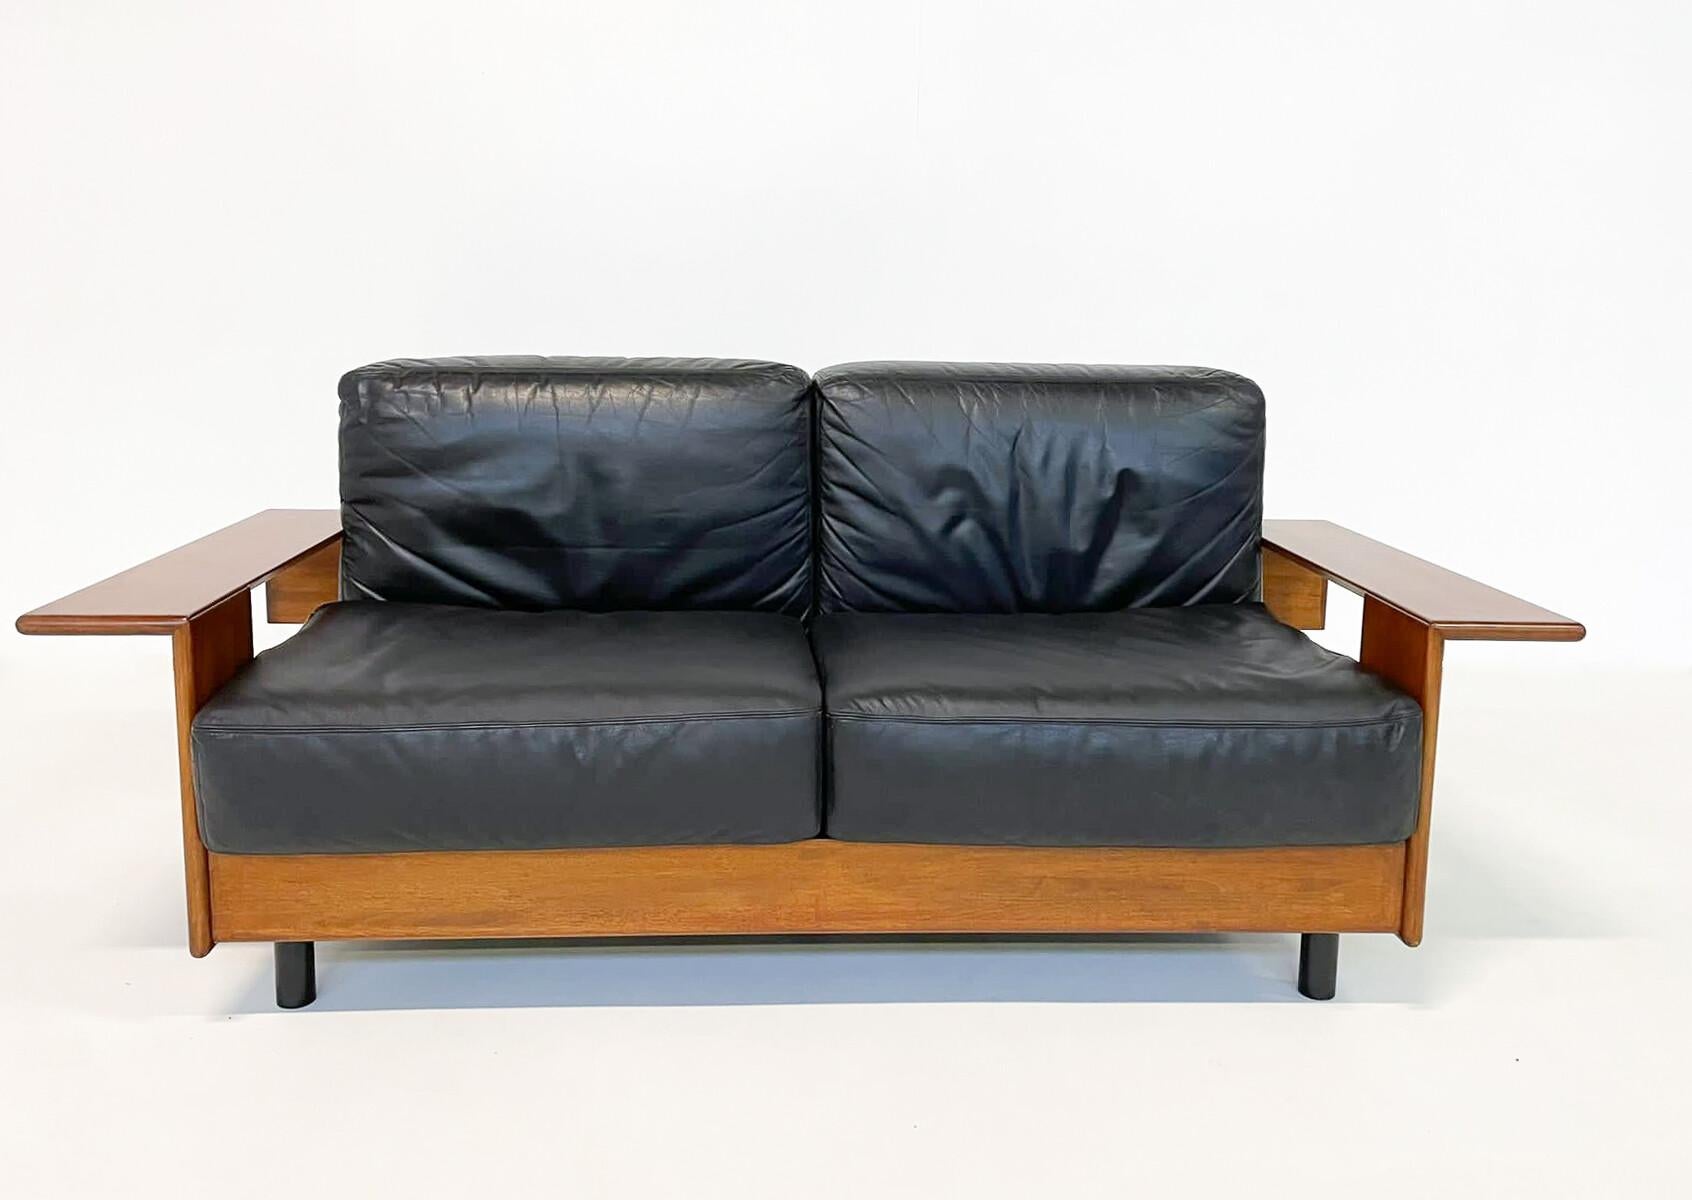 Mid-Century Modern Italian Sofa, Black Leather and Wood, 1960s, Two Available For Sale 2